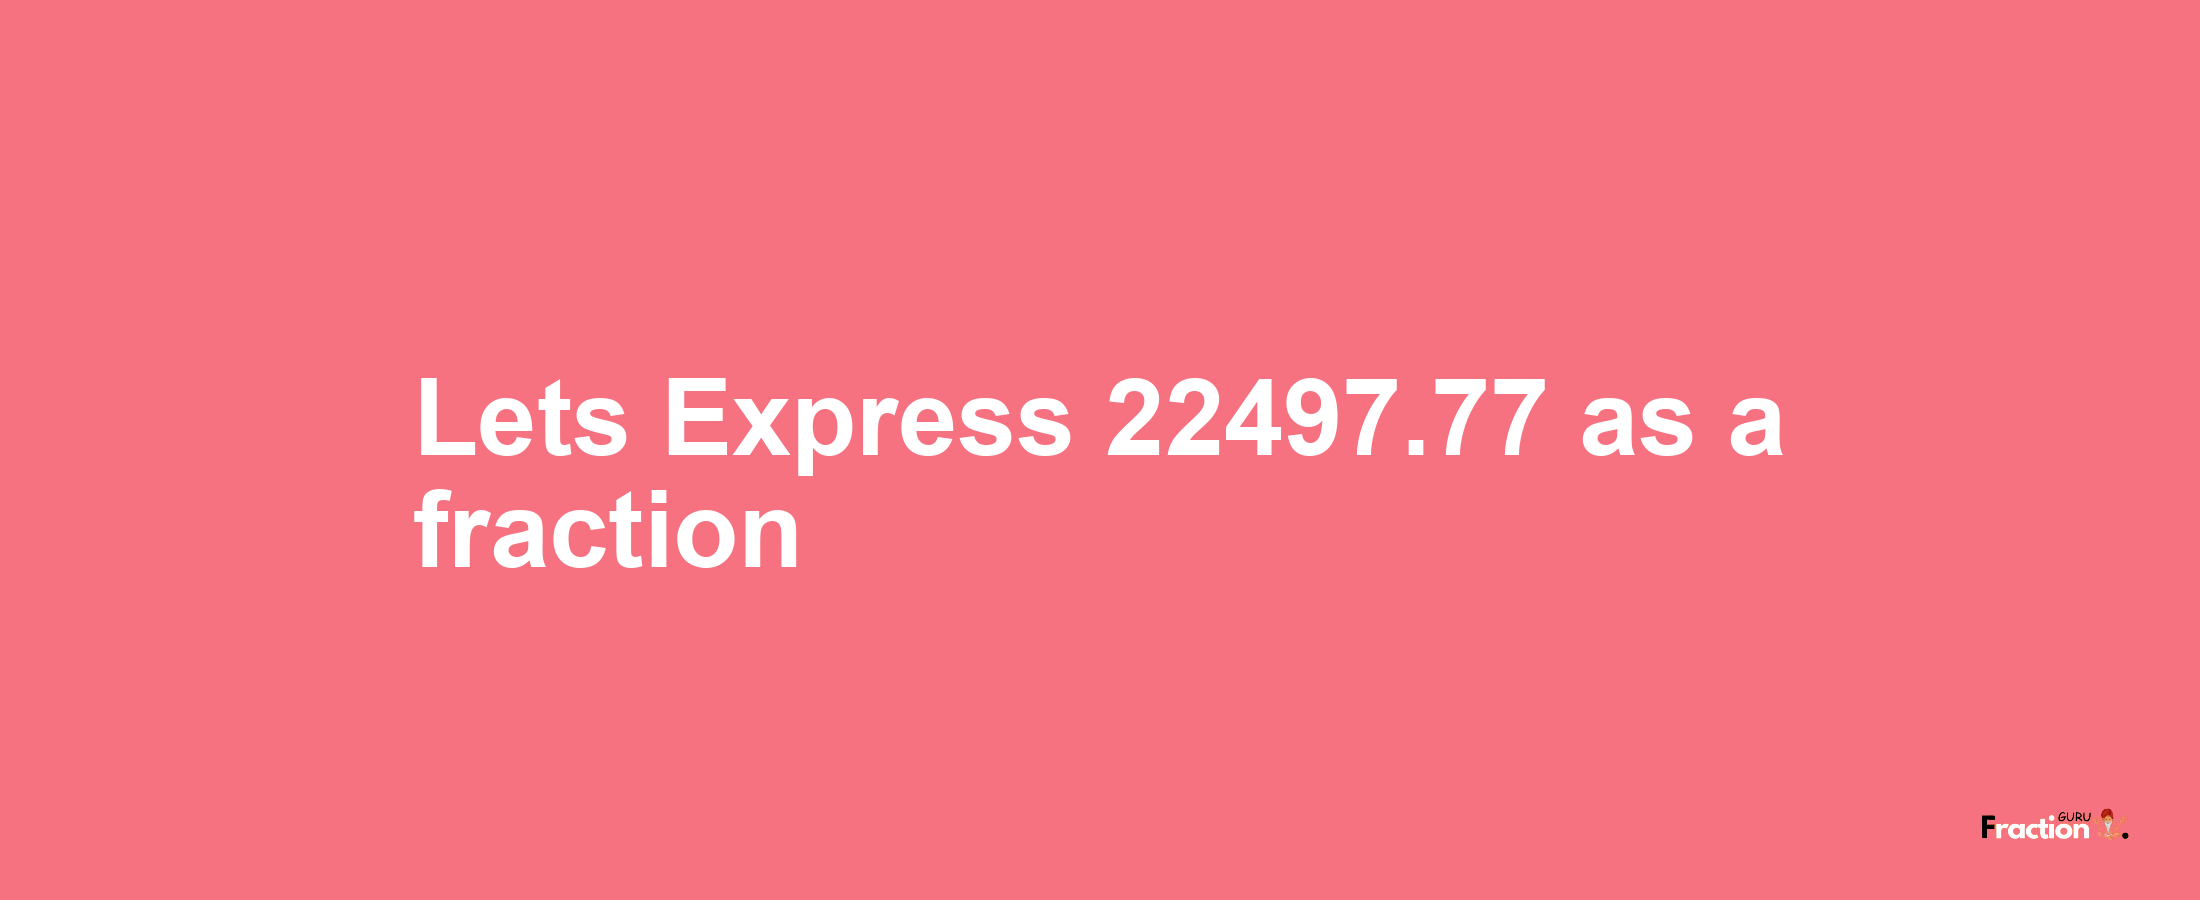 Lets Express 22497.77 as afraction